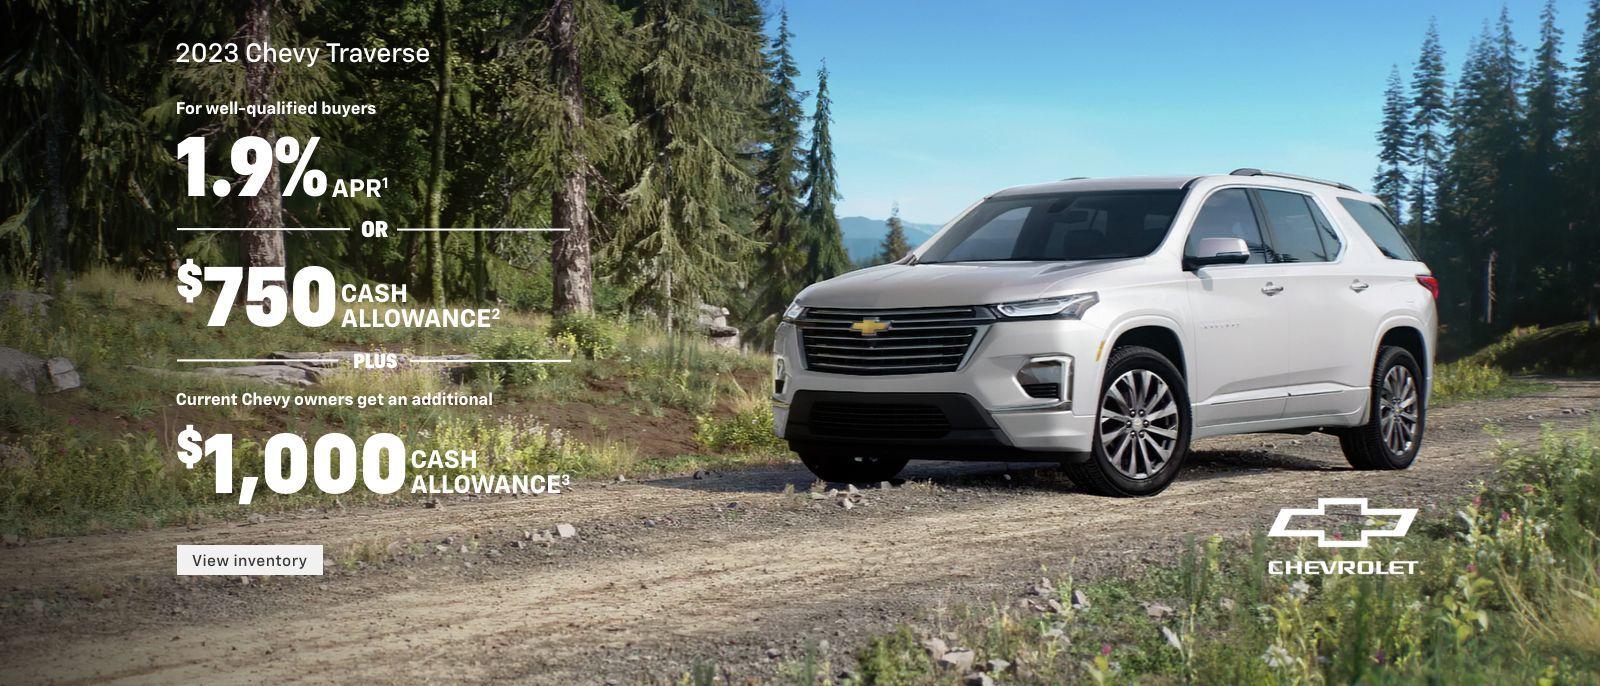 2023 Chevy Traverse. For well-qualified buyers 1.9% APR. Or, $750 cash allowance. Plus, current Chevy owners get an additional $1,000 cash allowance.